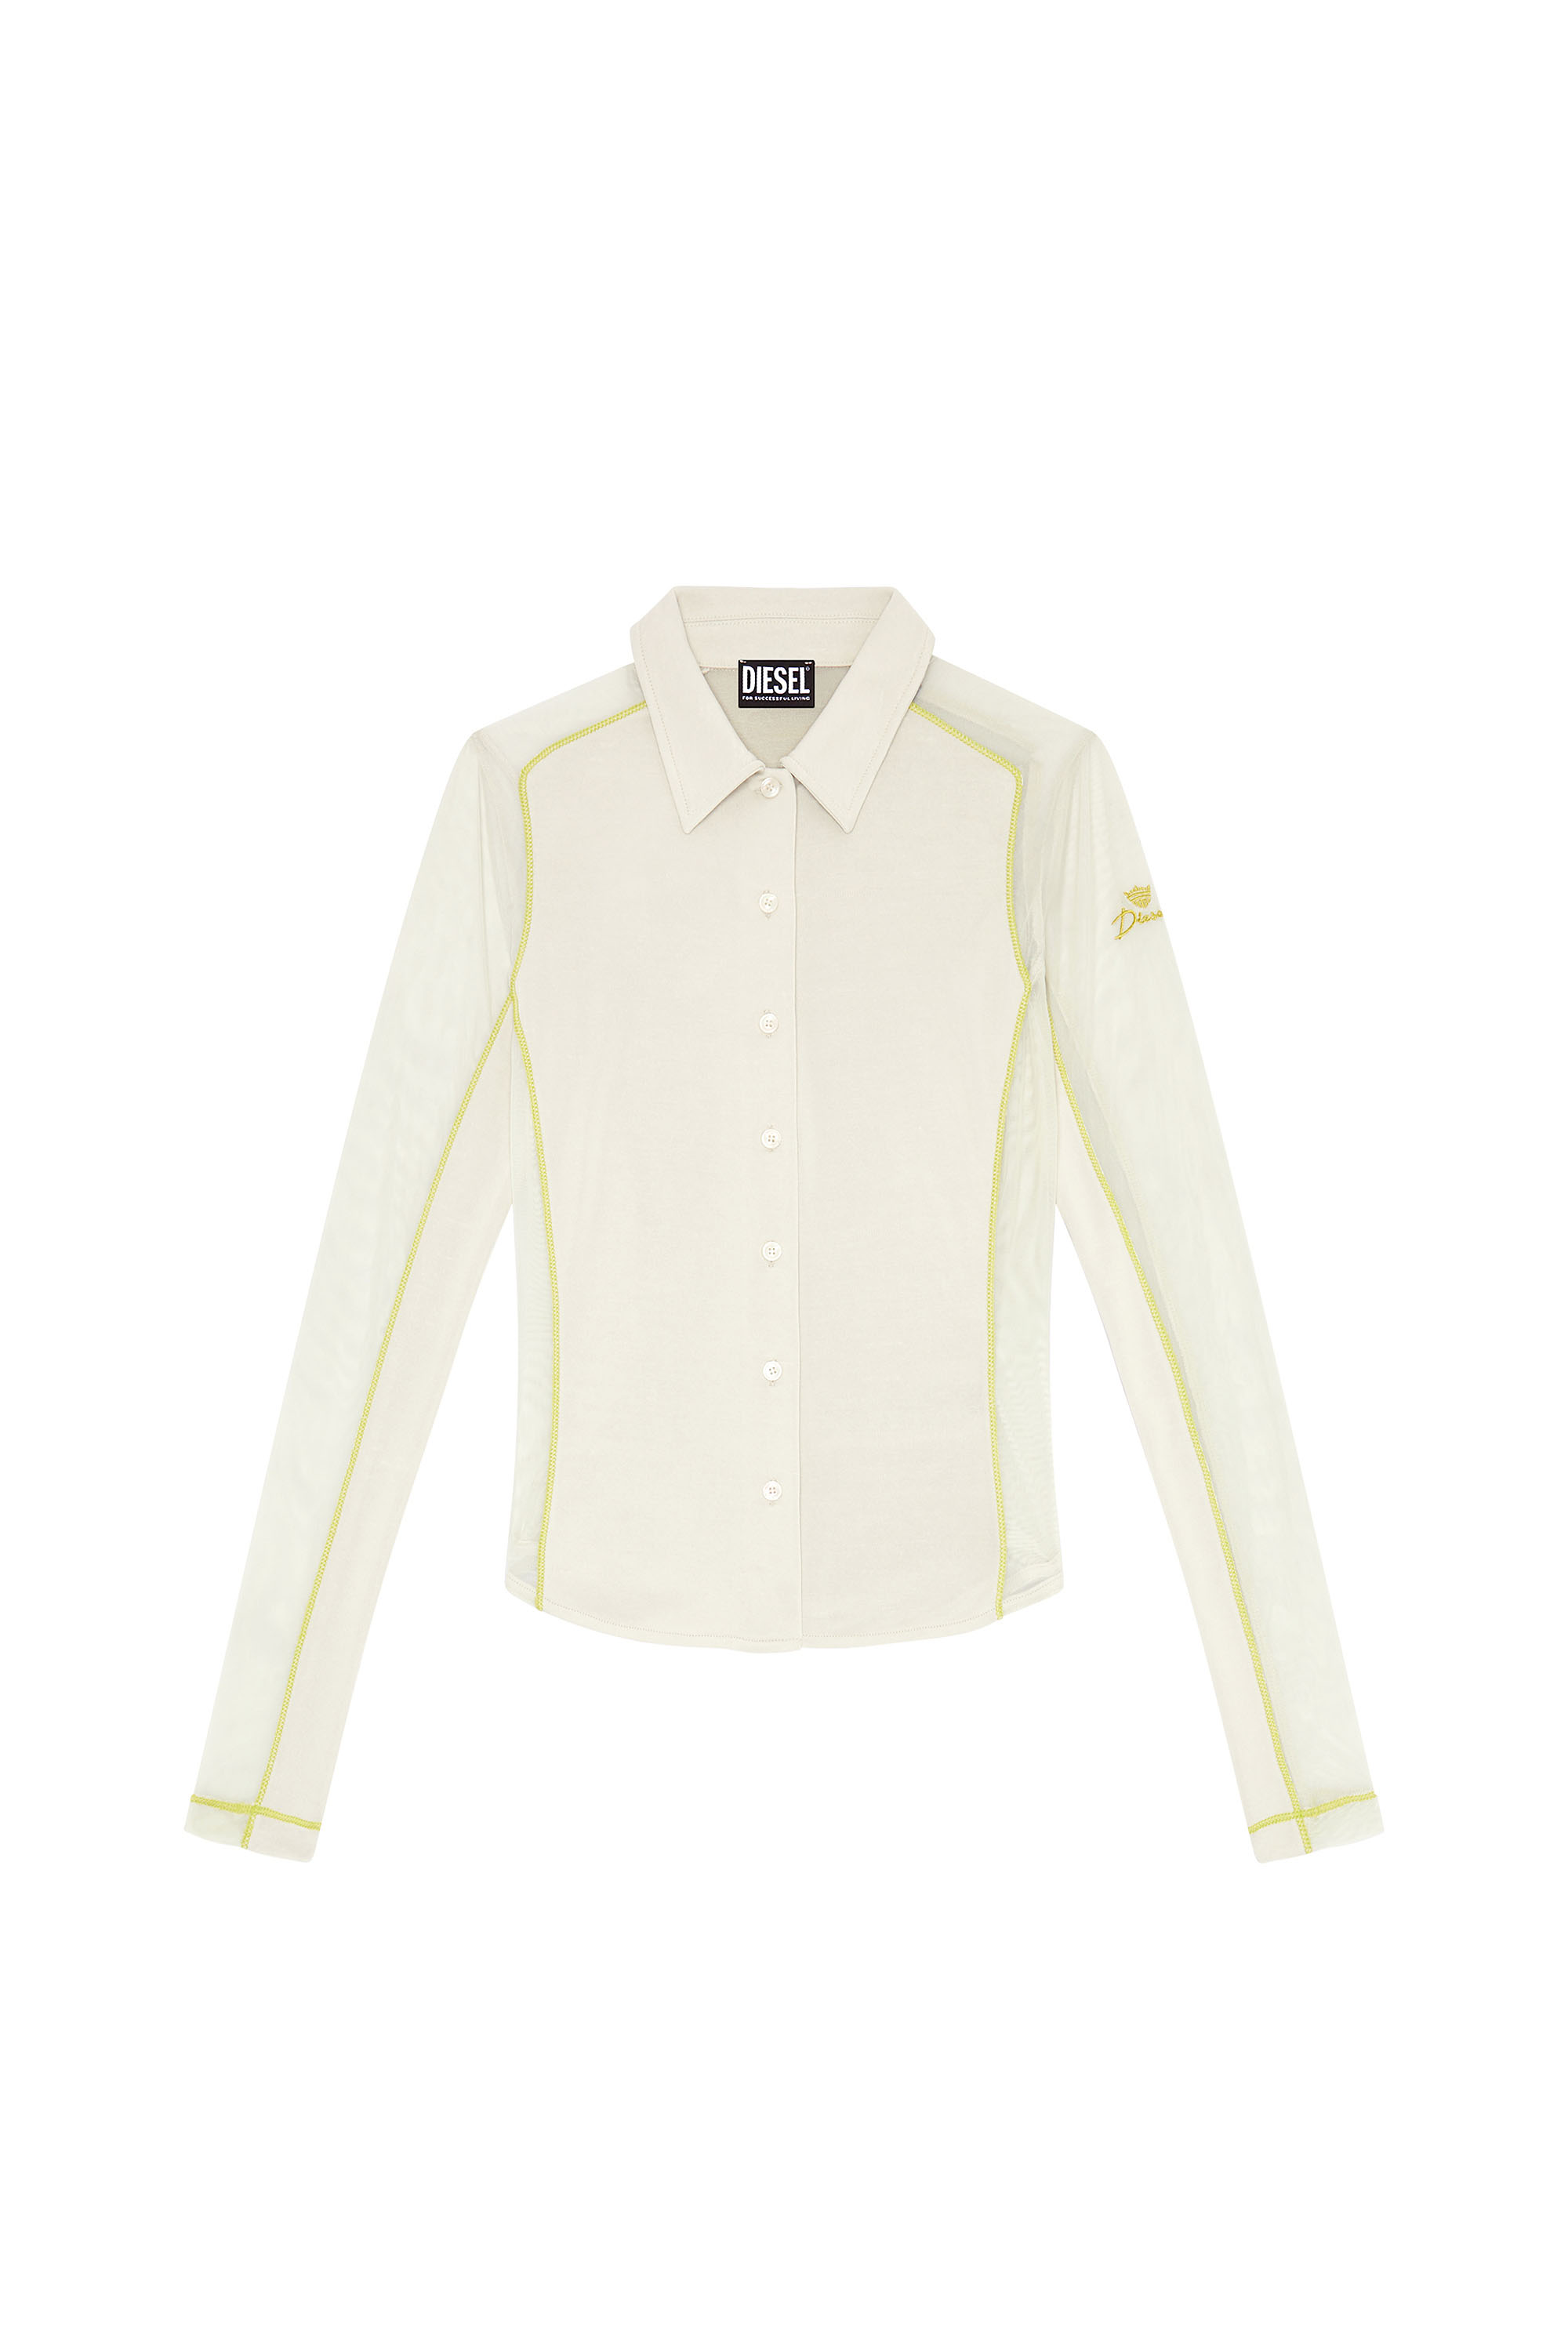 Diesel - T-NOXA, Woman Modal blend shirt with mesh inserts in White - Image 6